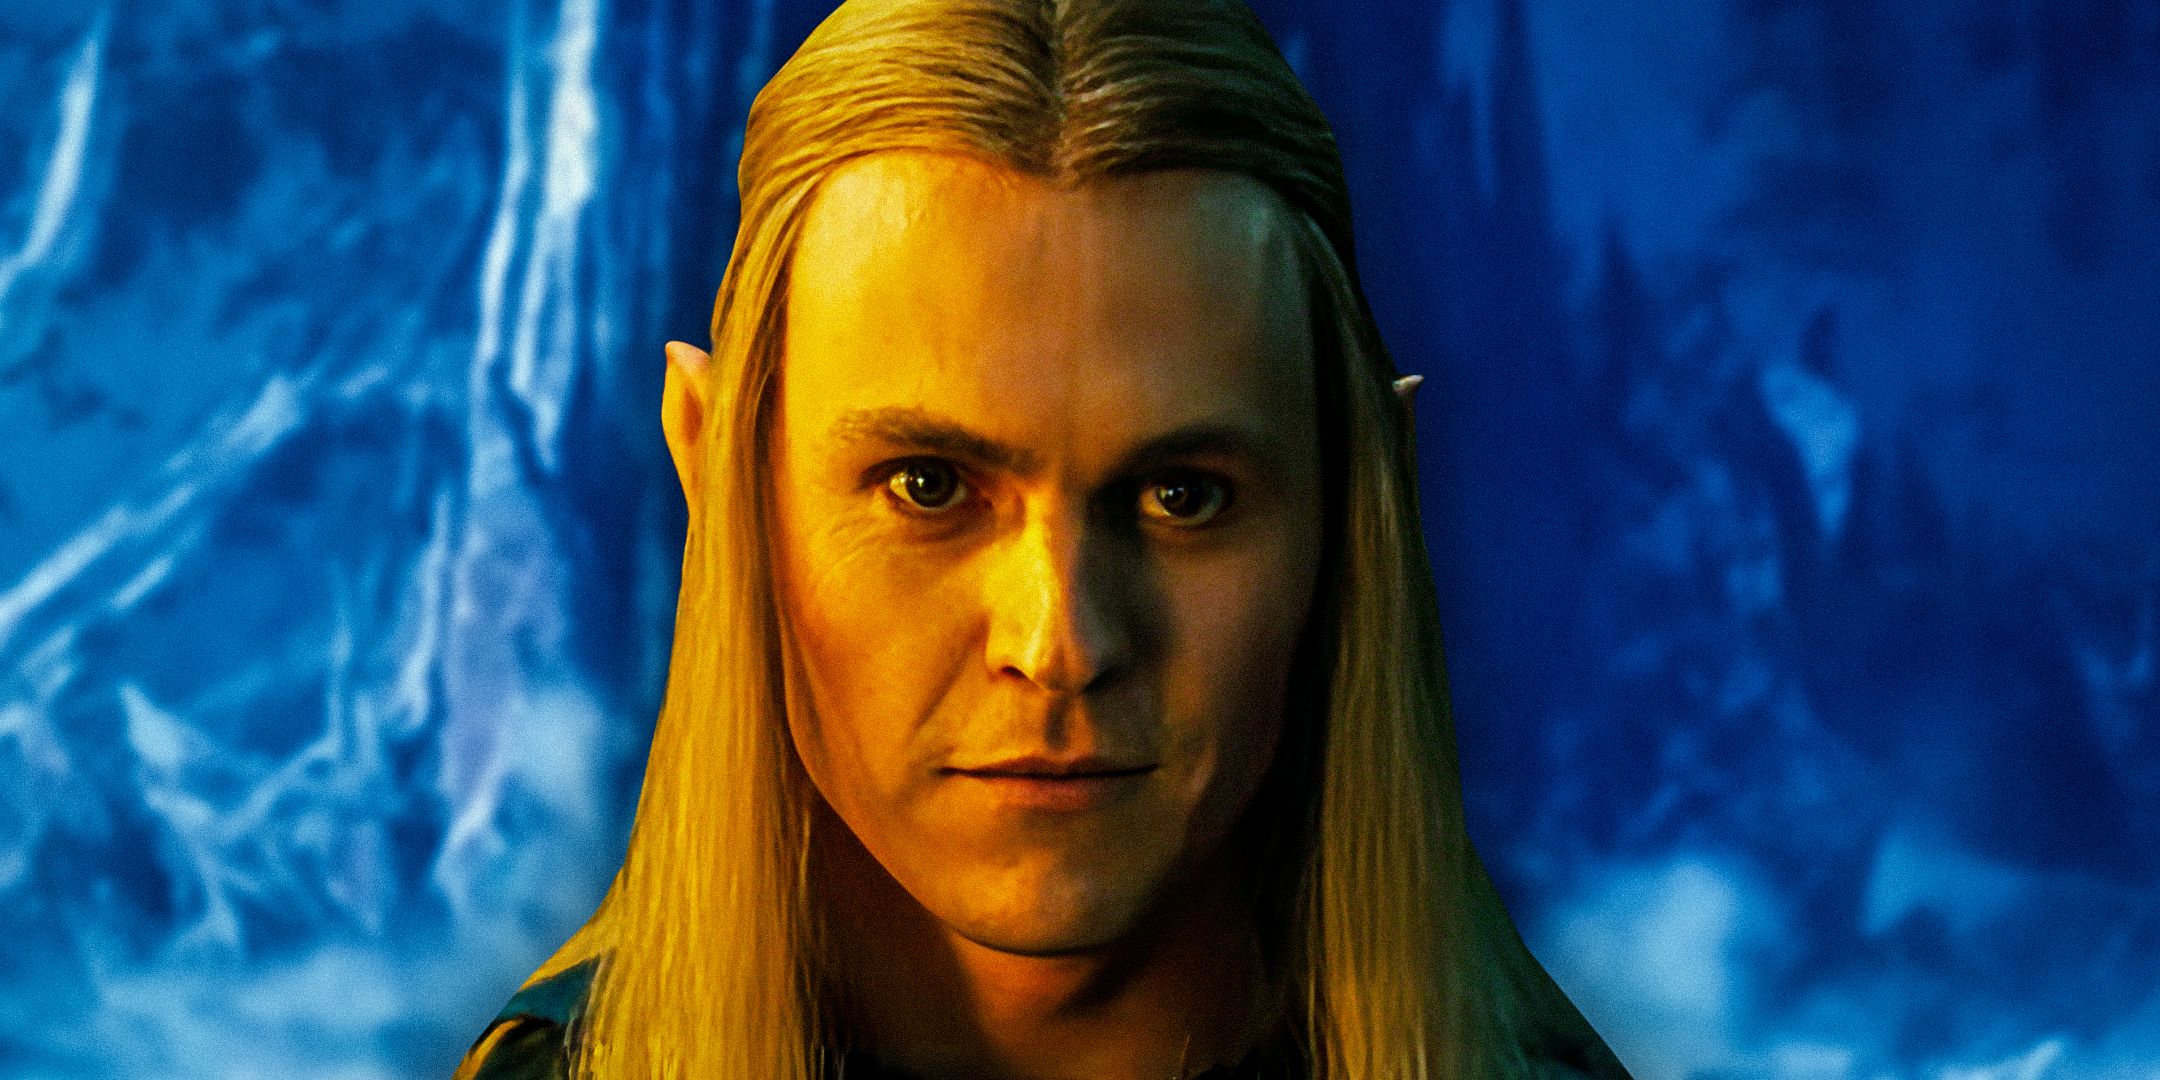 Sauron as Annatar played by Charlie Vickers in The Rings of Power season 2.